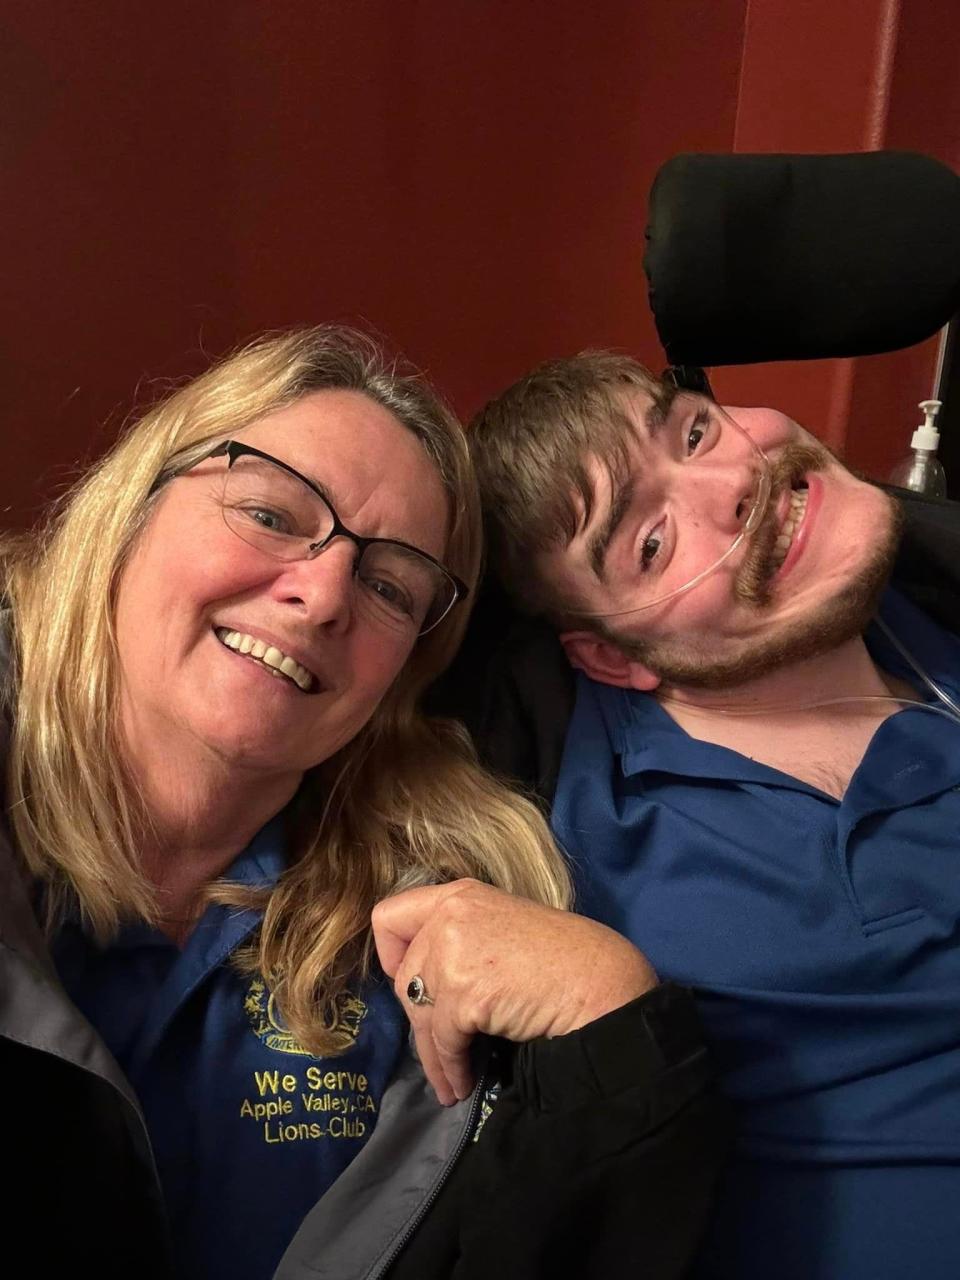 Donna Rollins said her family lost nearly $46,000 for their special needs son, Matthew, after a trust founder's suspected embezzlement of millions of dollars.